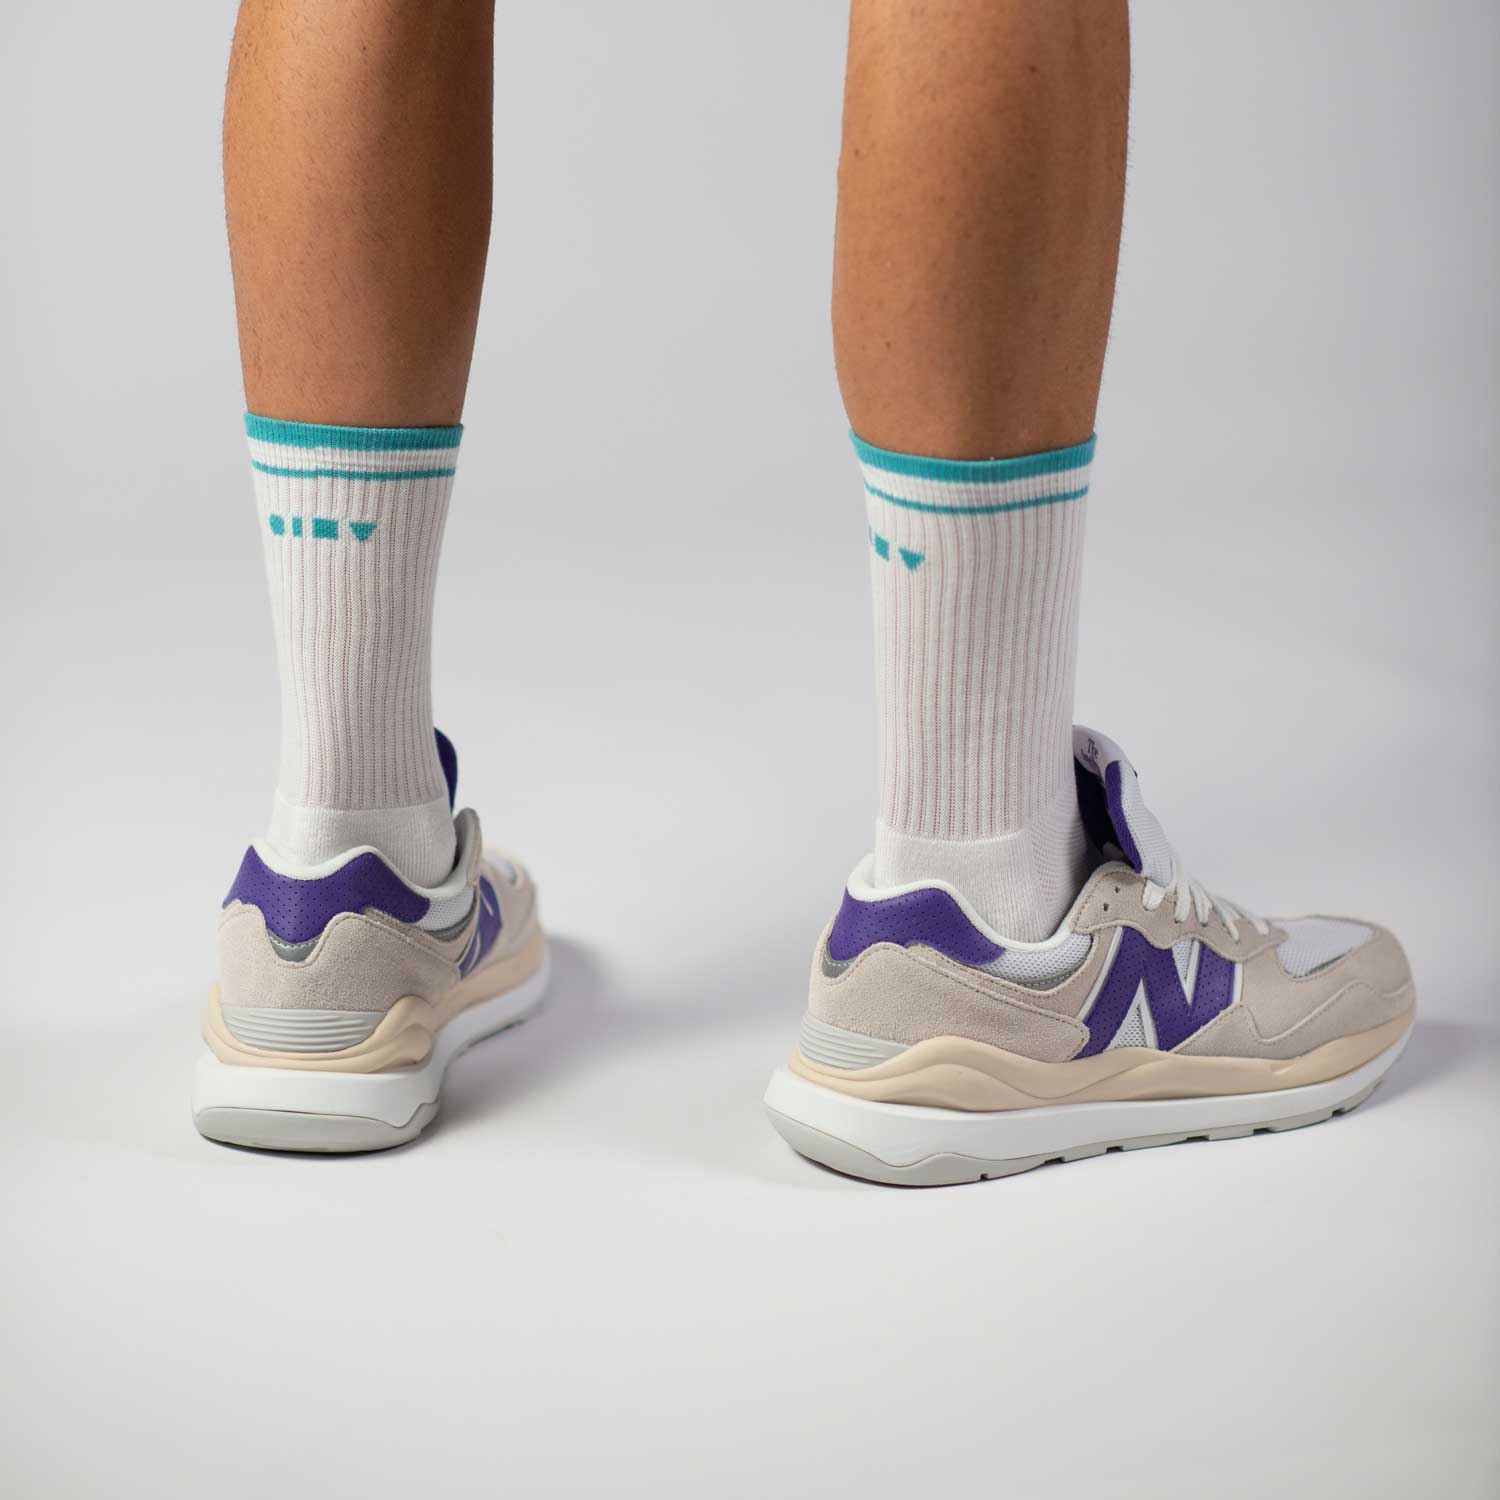 Clay Active tennis socks with New Balance shoes.